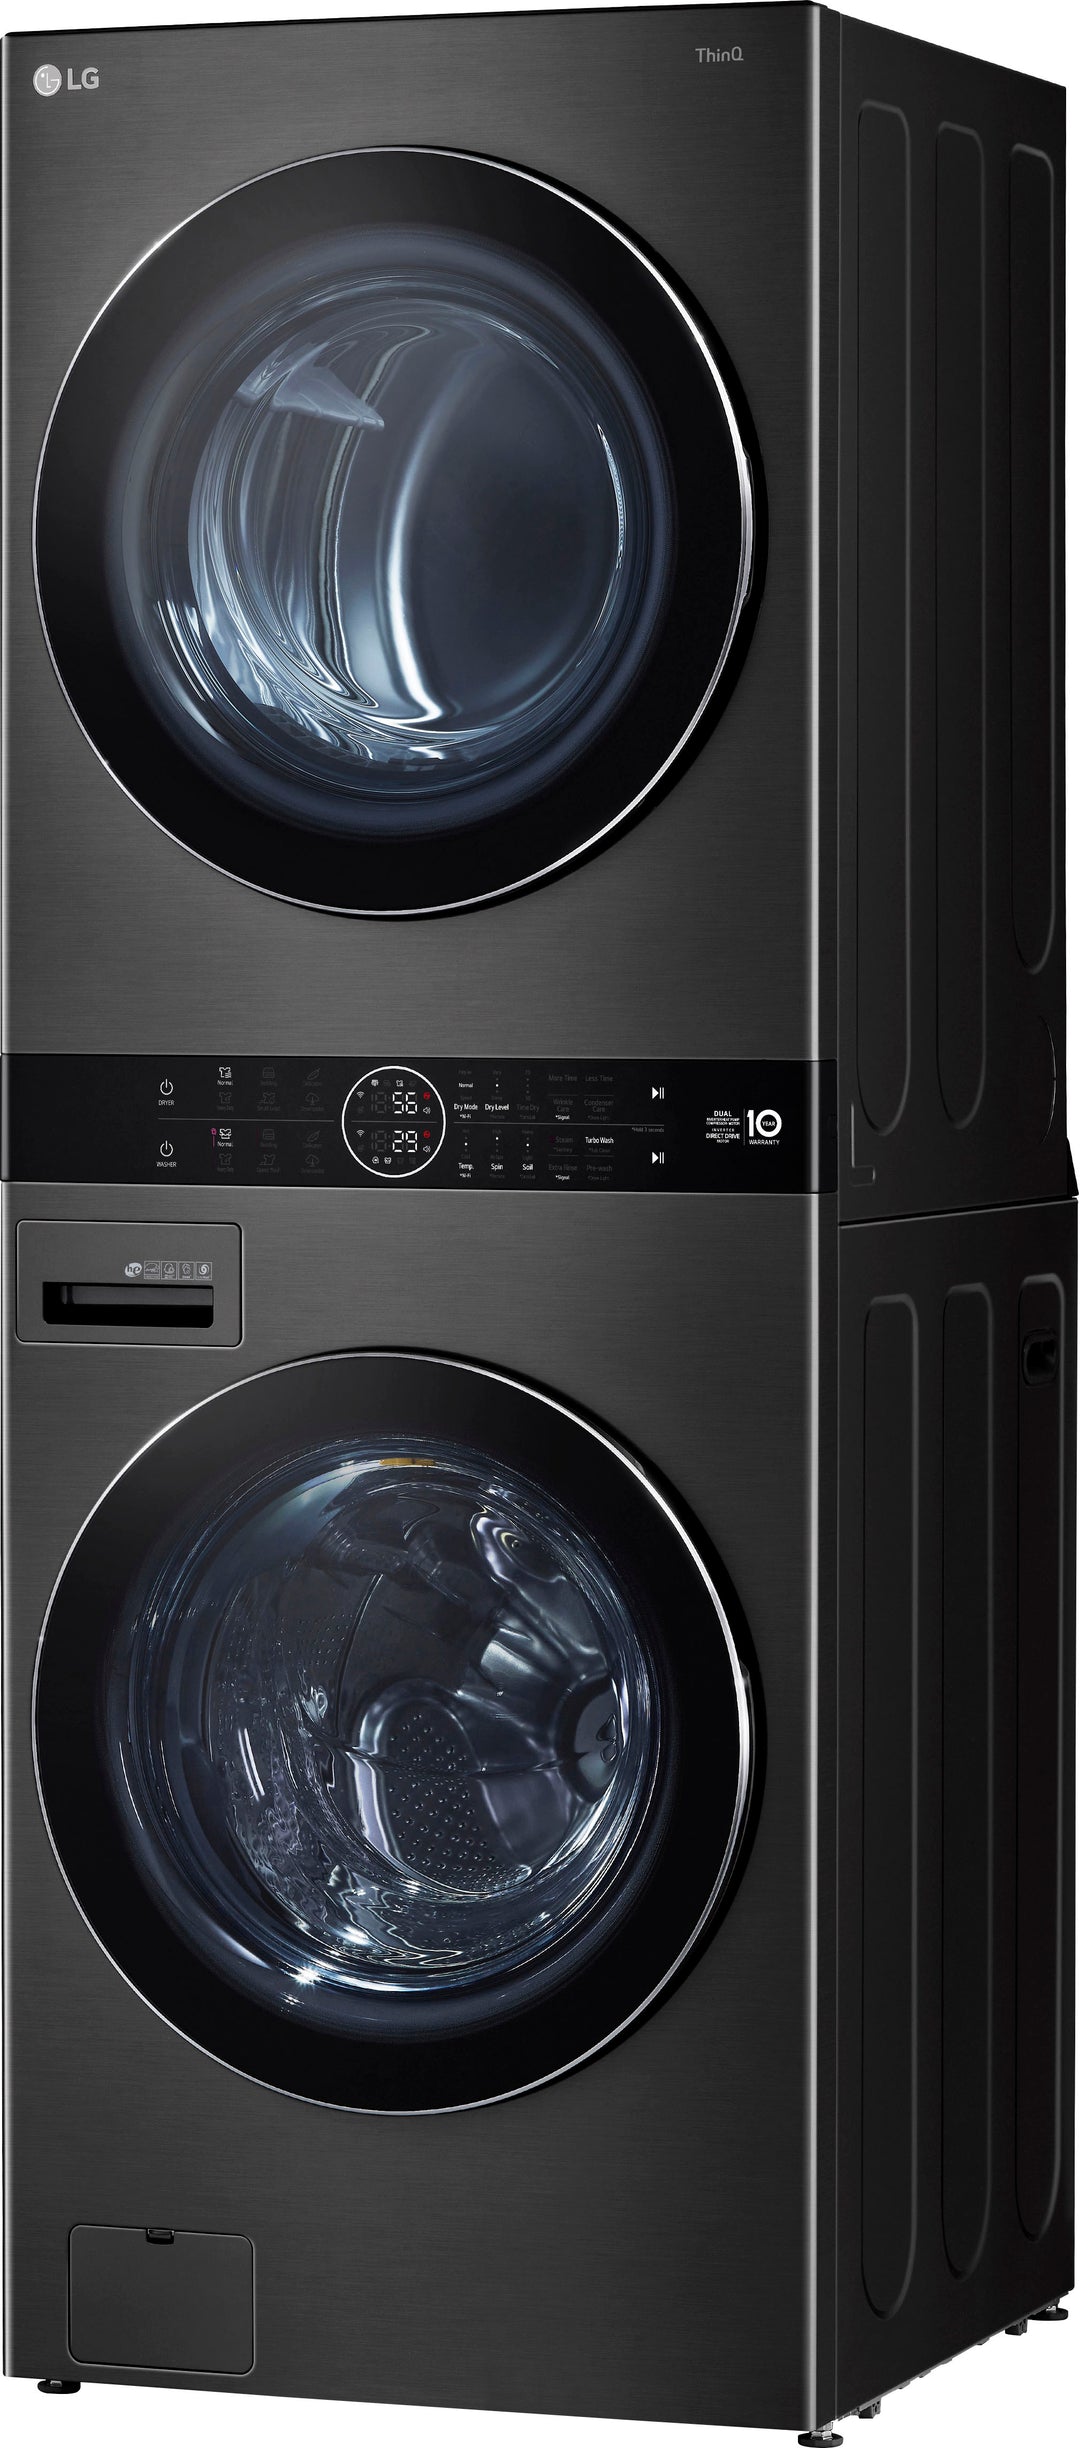 LG - 4.5 Cu. Ft. HE Smart Front Load Washer and 7.4 Cu. Ft. Electric Dryer WashTower with Steam and Ventless Dryer - Black Steel_2